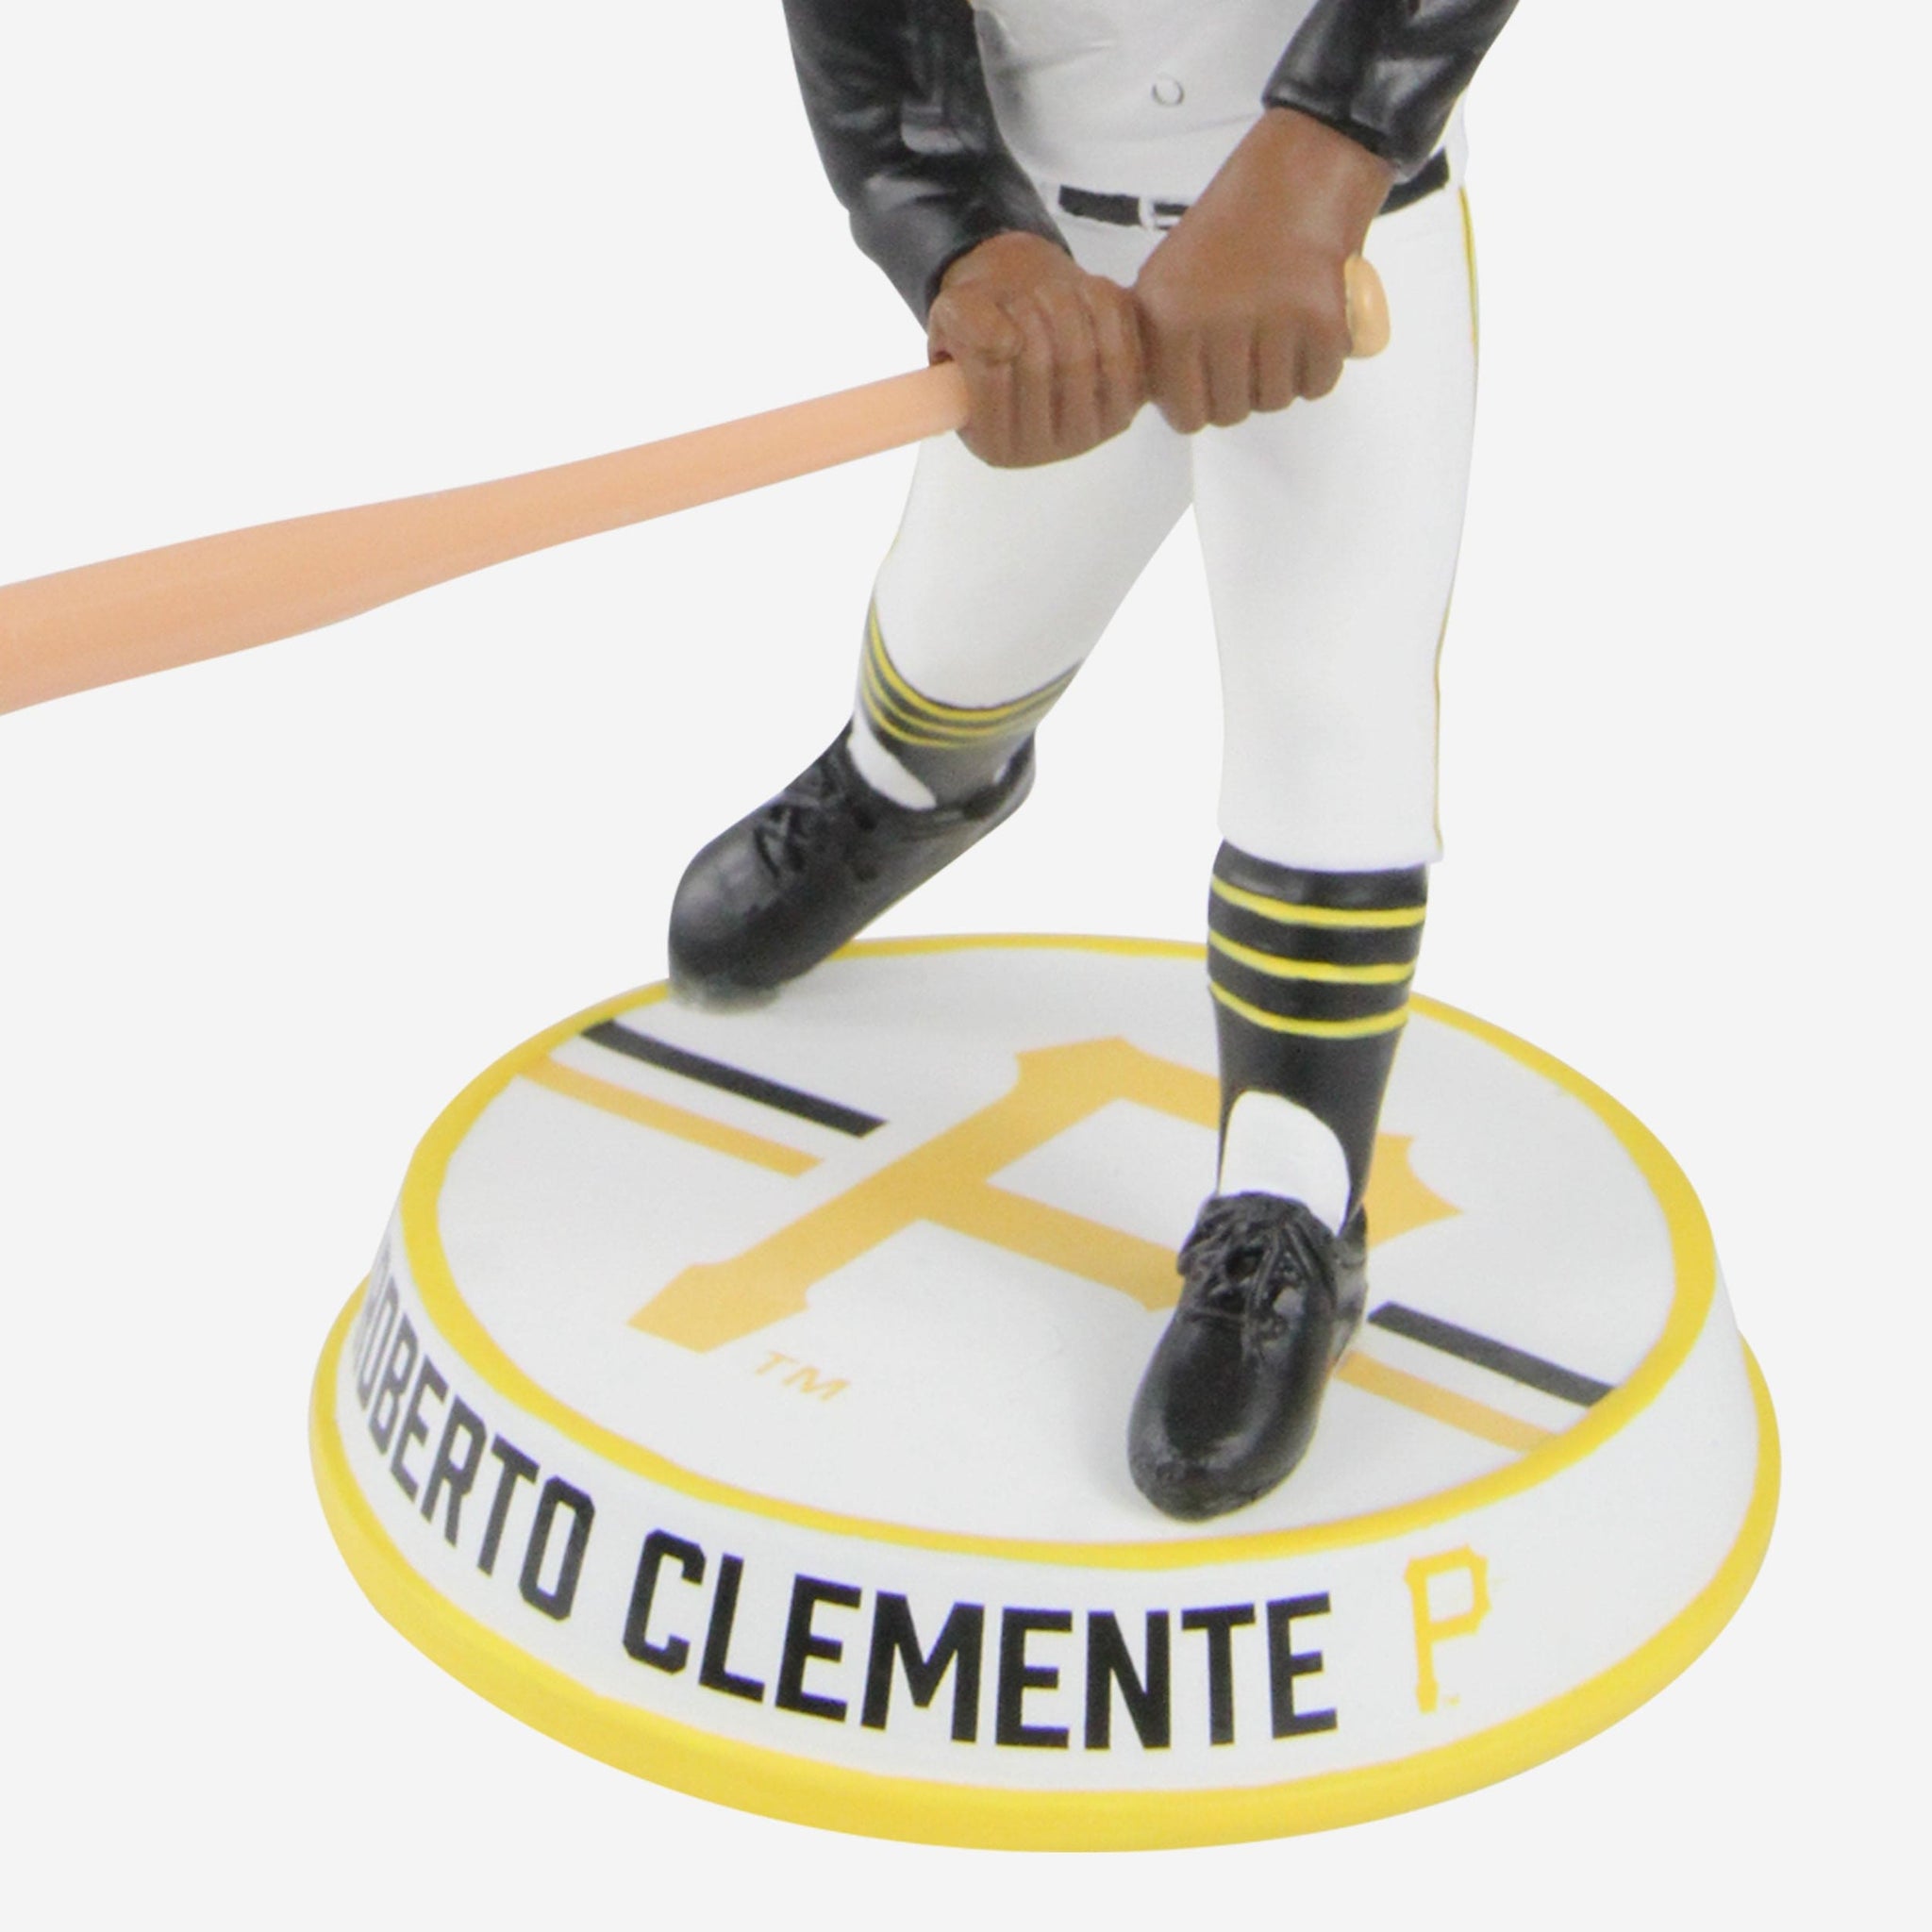 FOCO launches Roberto Clemente collectibles, including a 3-foot